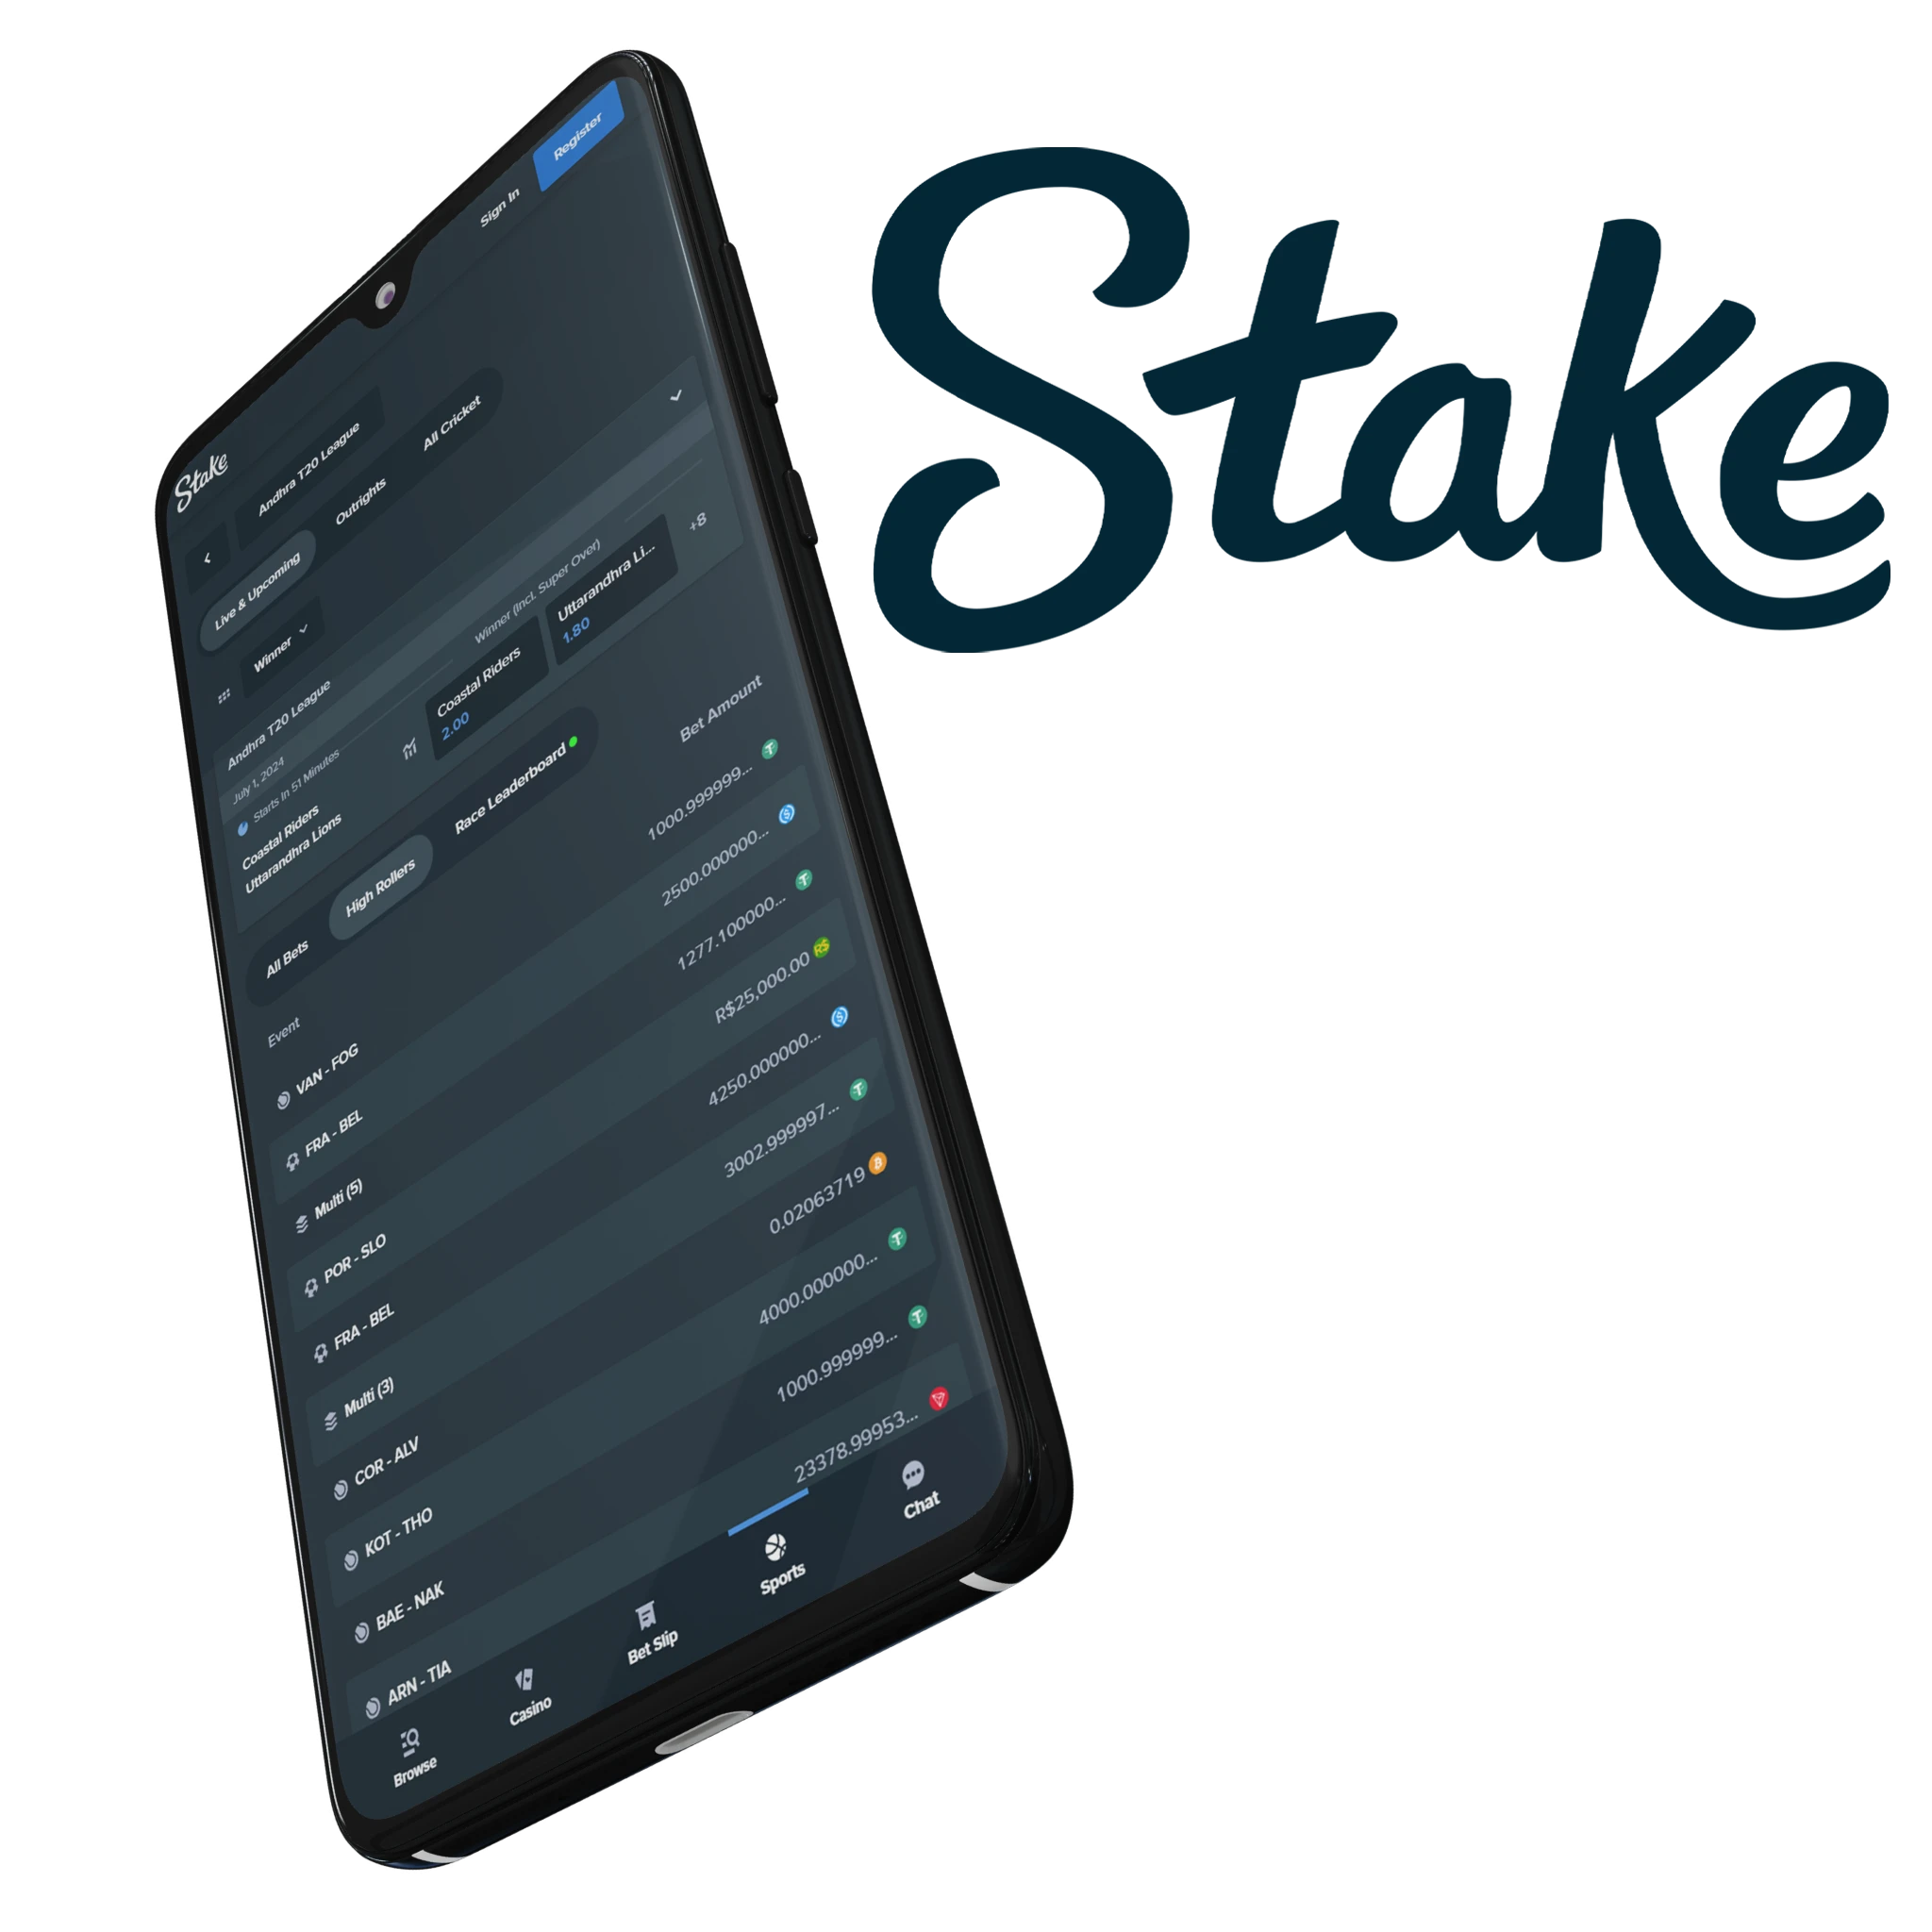 Stake app daily selection of users from India to bet on IPL matches.